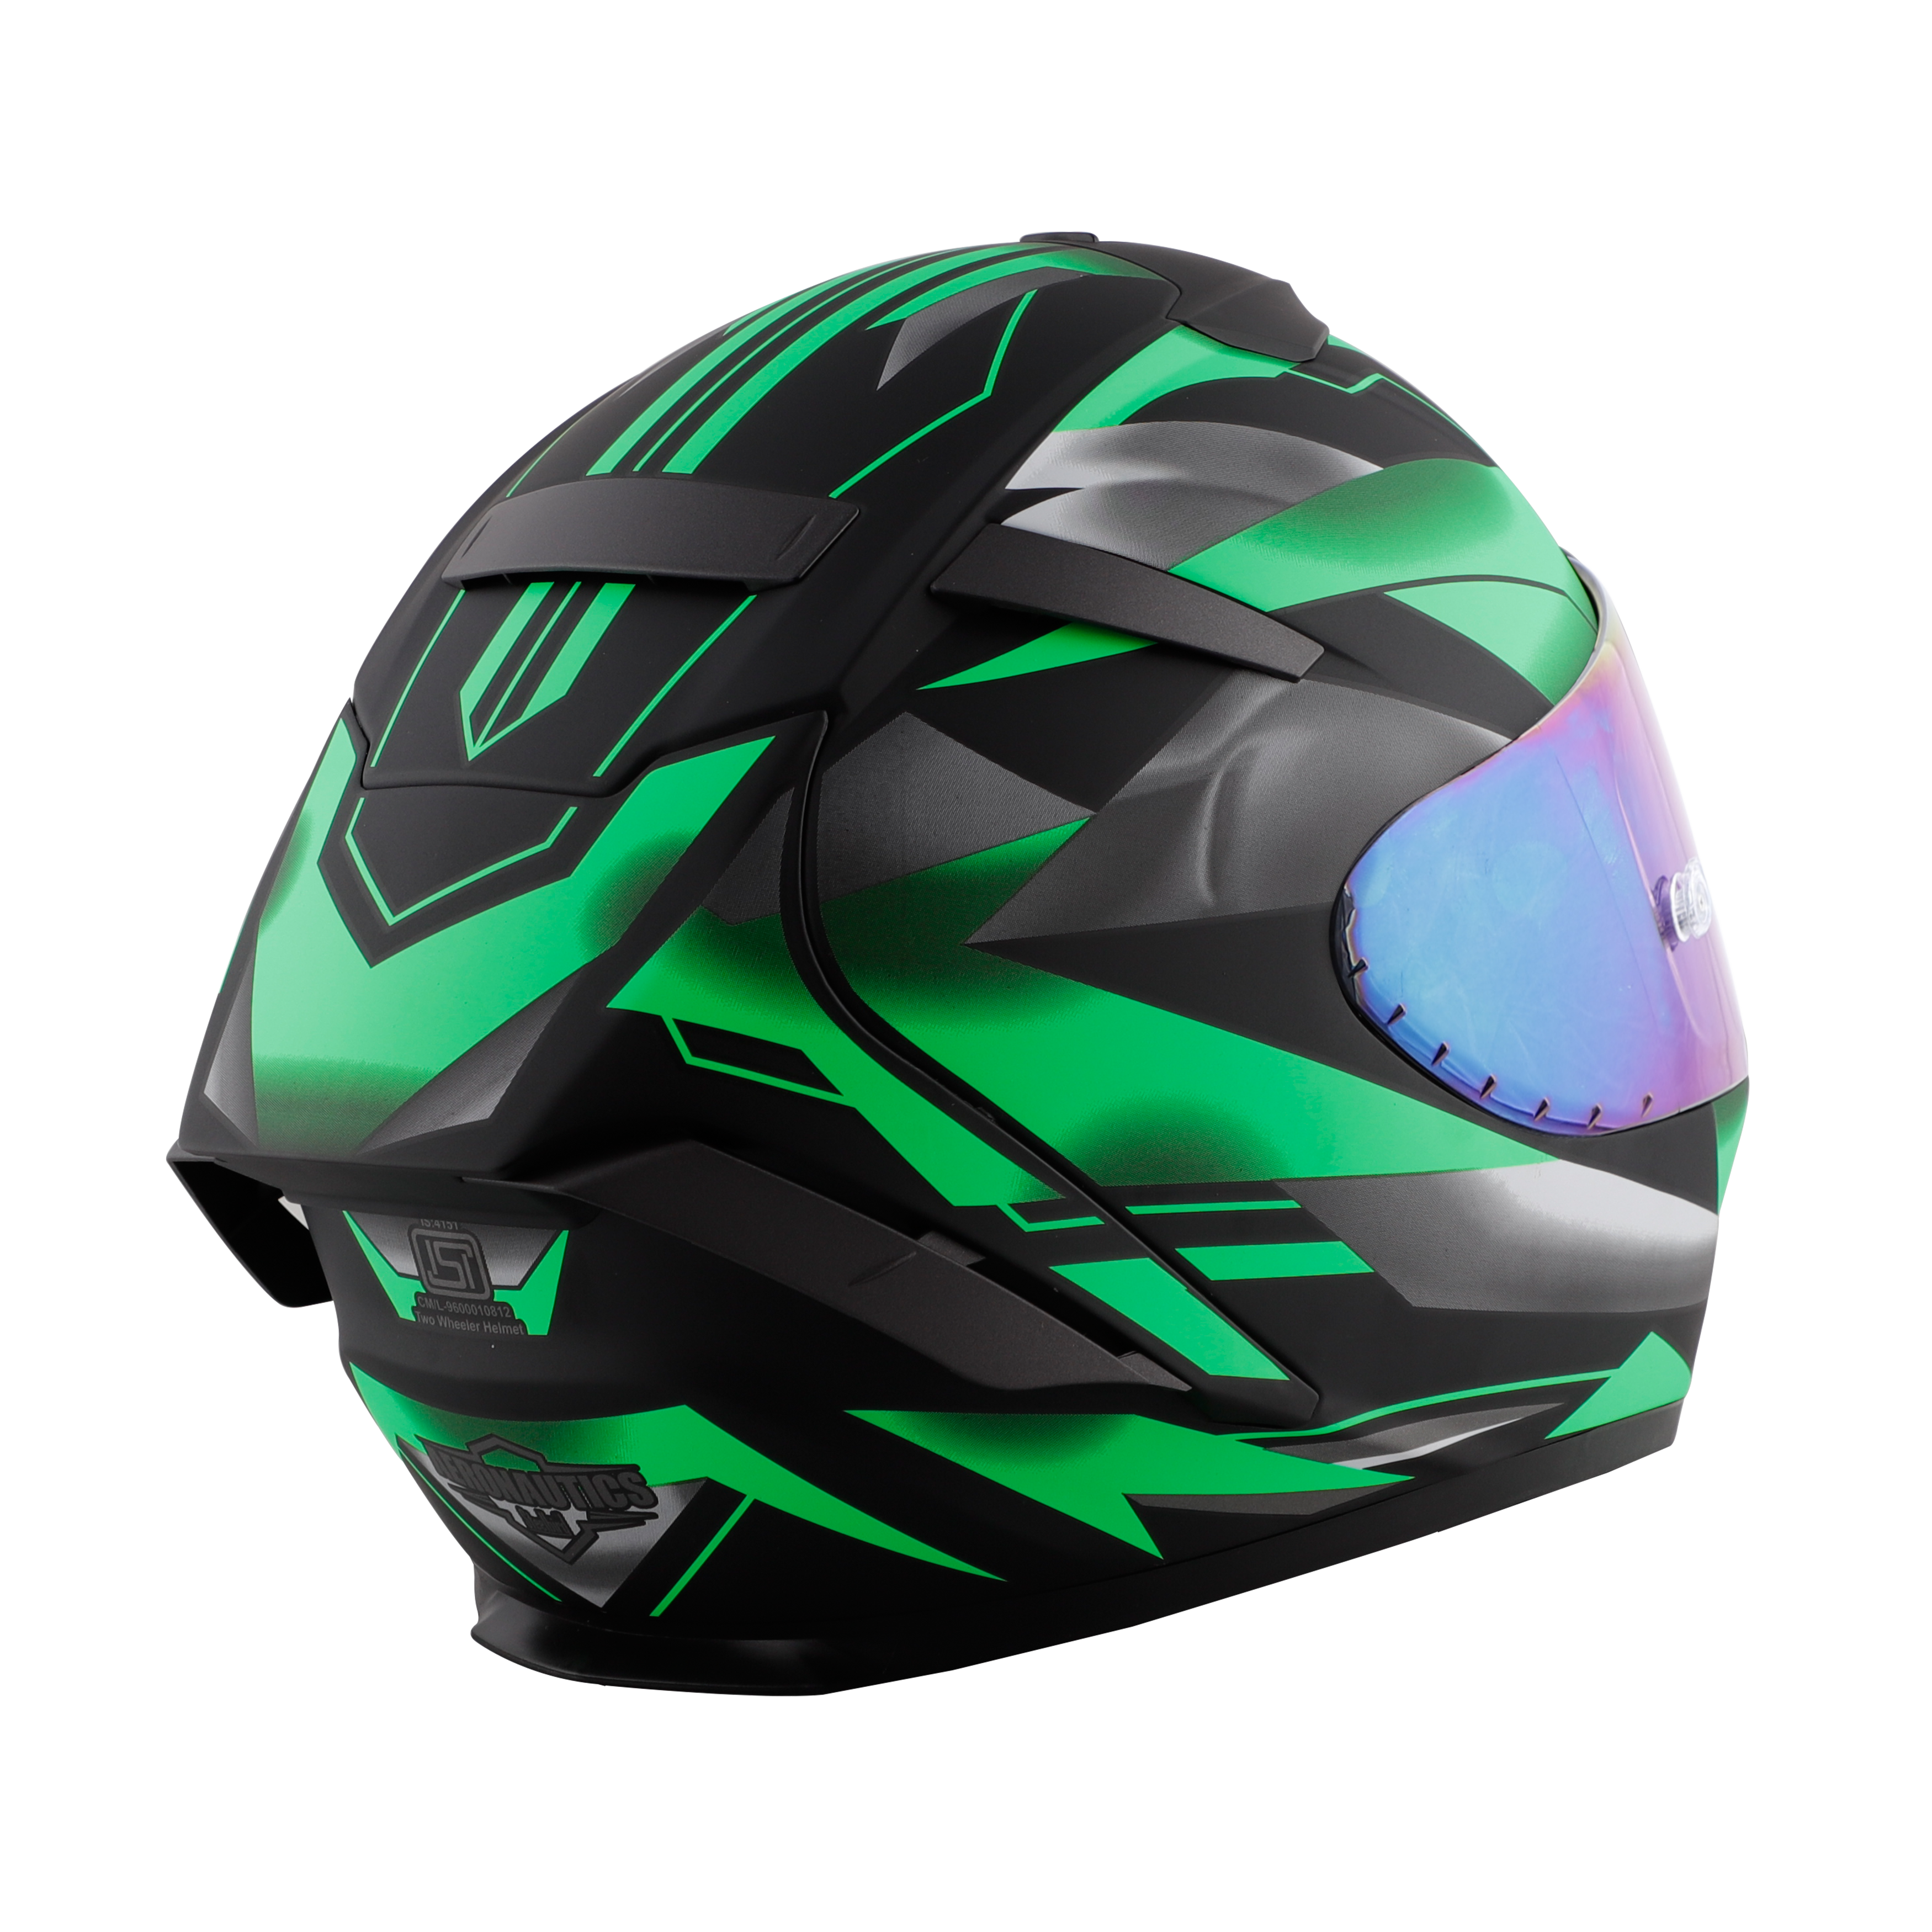 SA-2 METALLIC GLOSSY BLACK WITH FLUO GREEN ( FITTED WITH CLEAR VISOR  EXTRA CHROME RAINBOW VISOR FREE) WITH ANTI-FOG SHIELD HOLDER